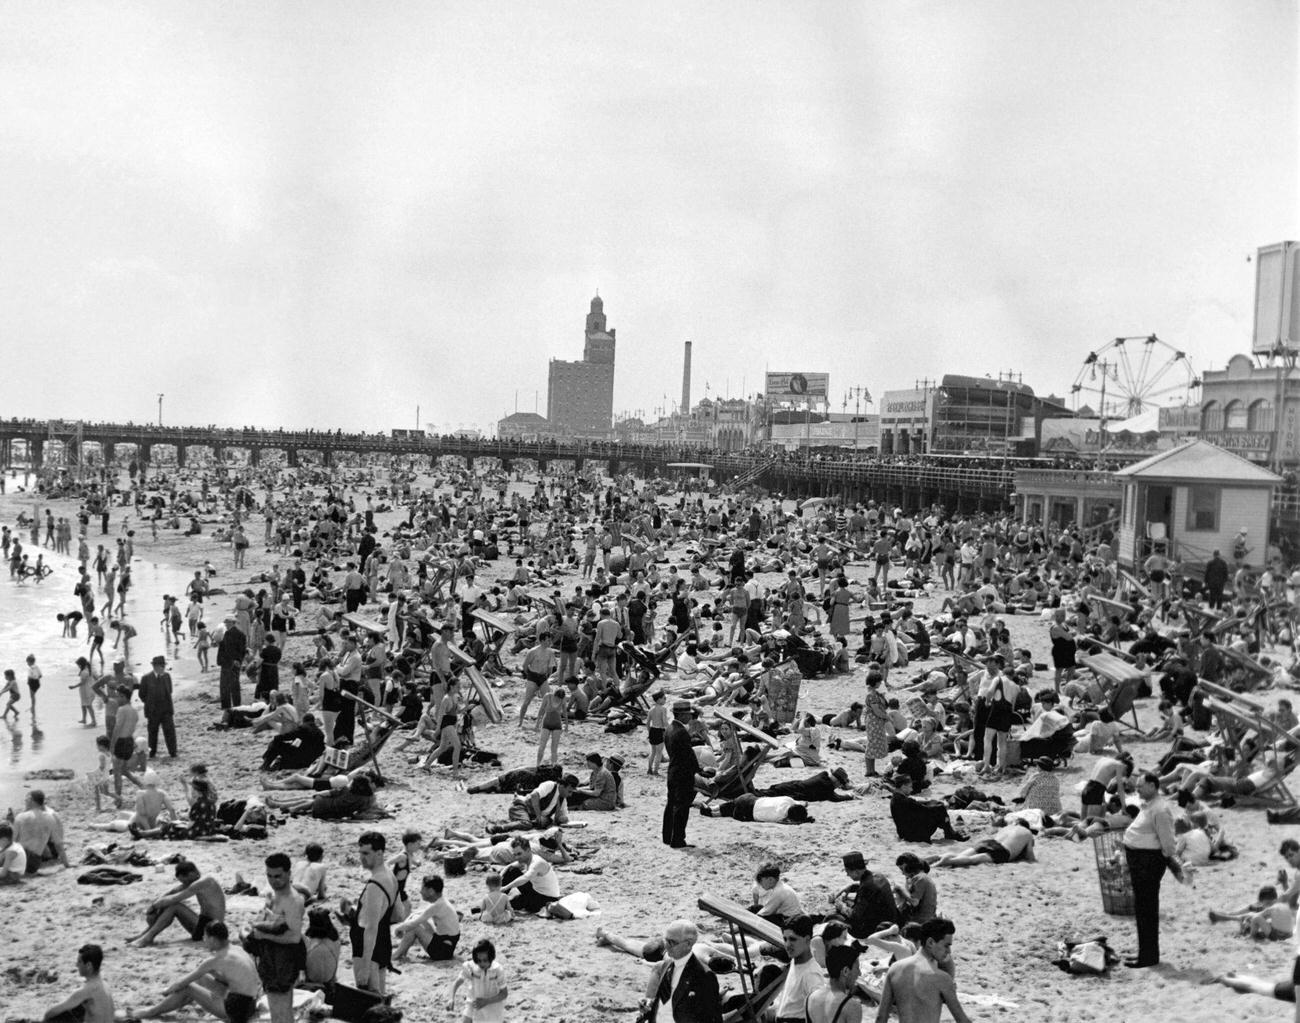 Crowded Coney Island Beach Refreshes Boaters, May 28, 1939